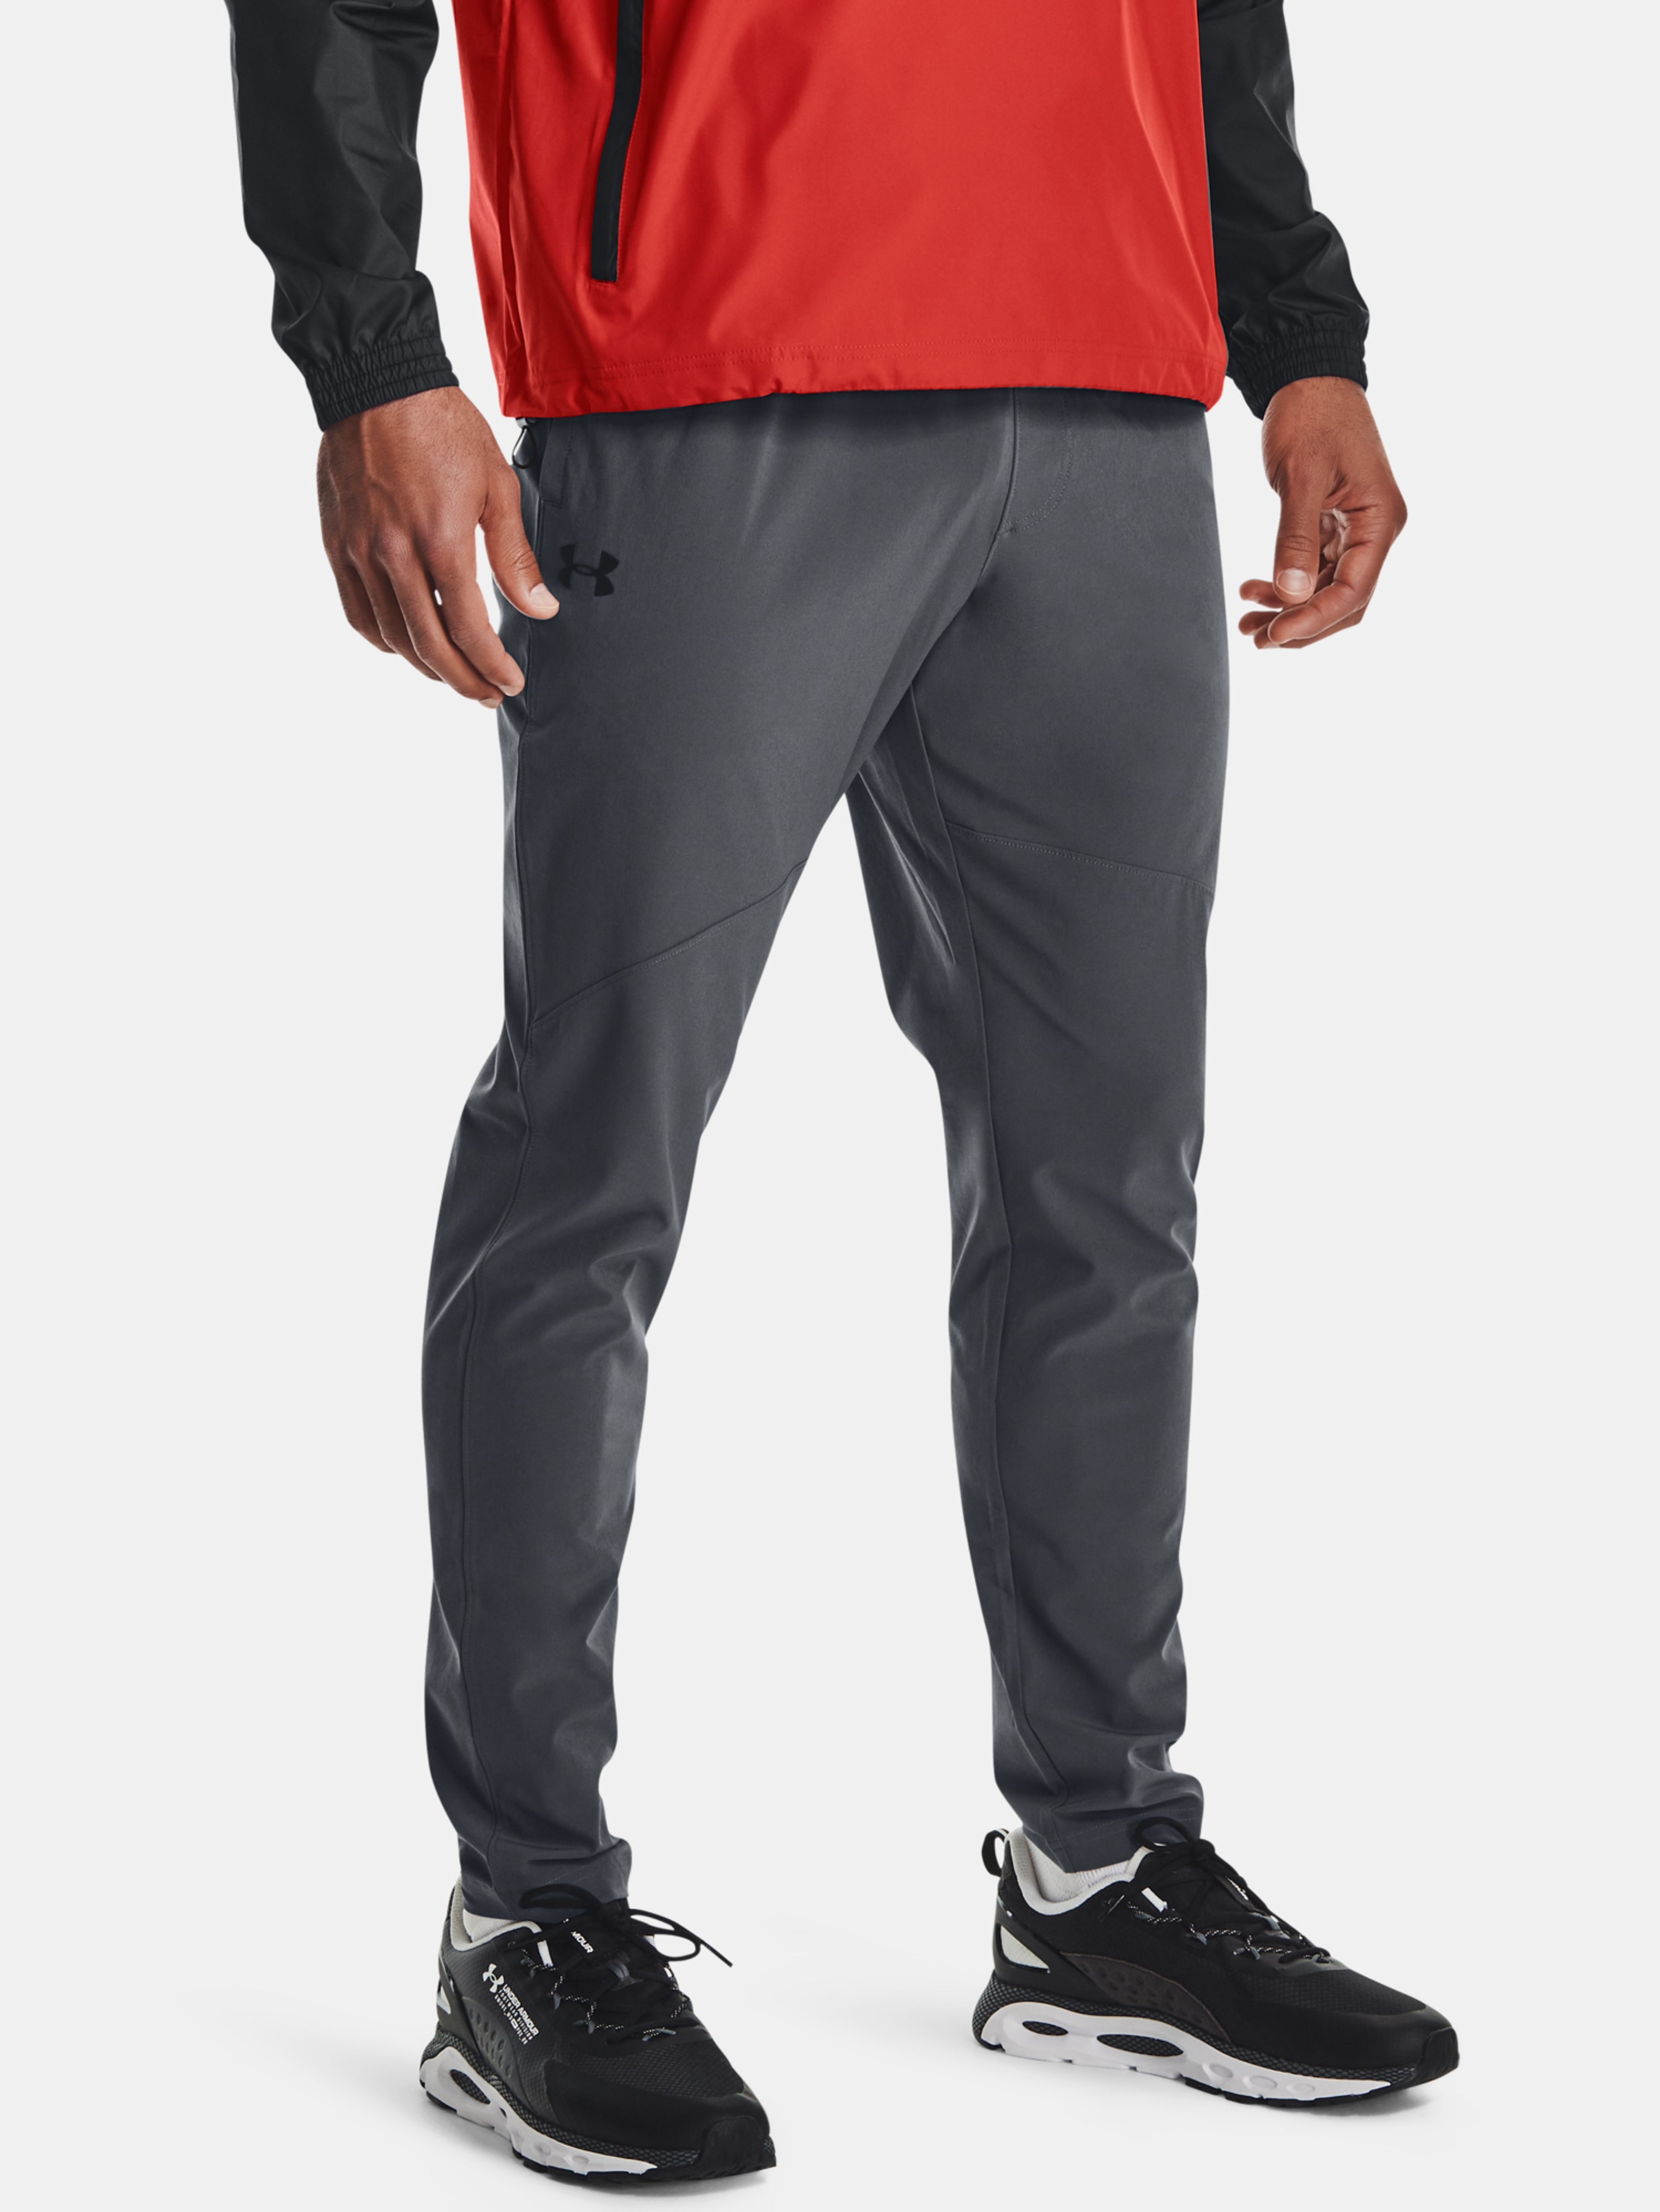 Kalhoty Under Armour UA Storm STRETCH WOVEN PANT-GRY